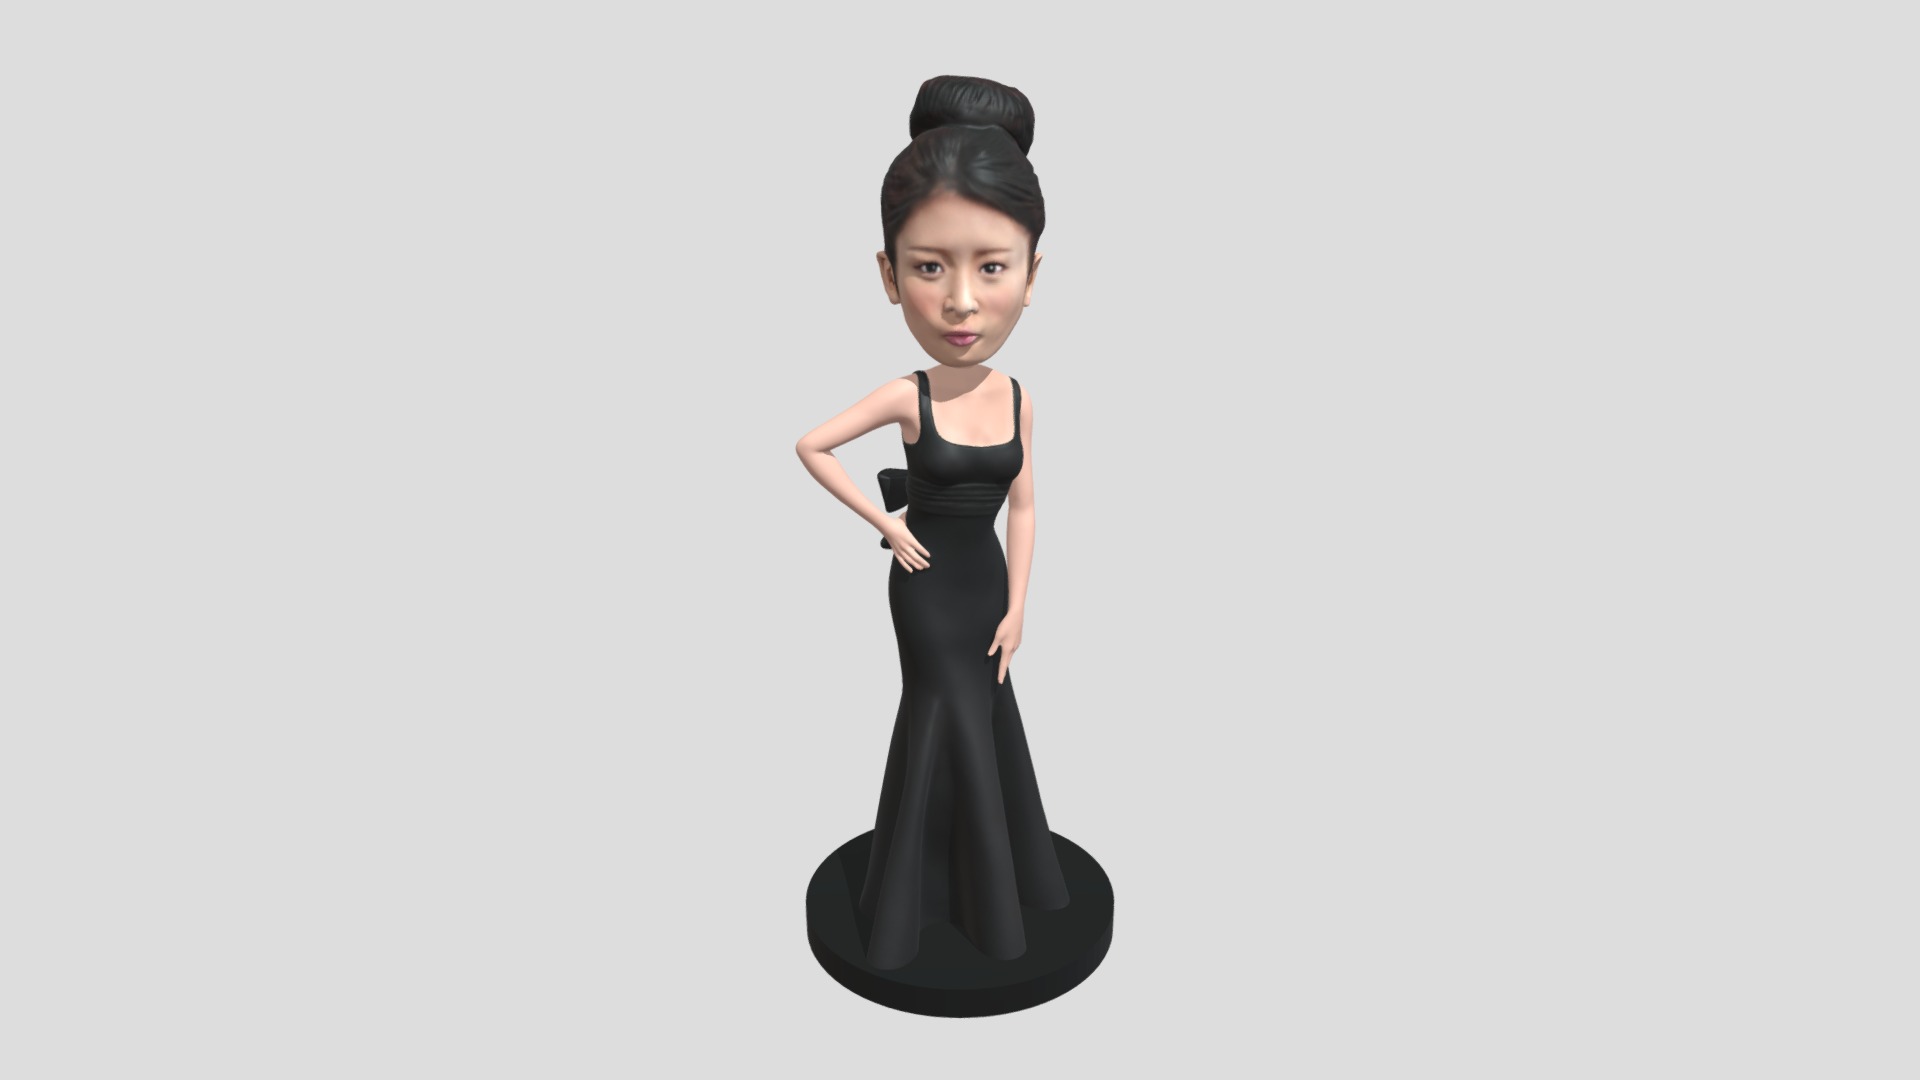 3D model 423-15 5-3cm - This is a 3D model of the 423-15 5-3cm. The 3D model is about a person in a black dress.